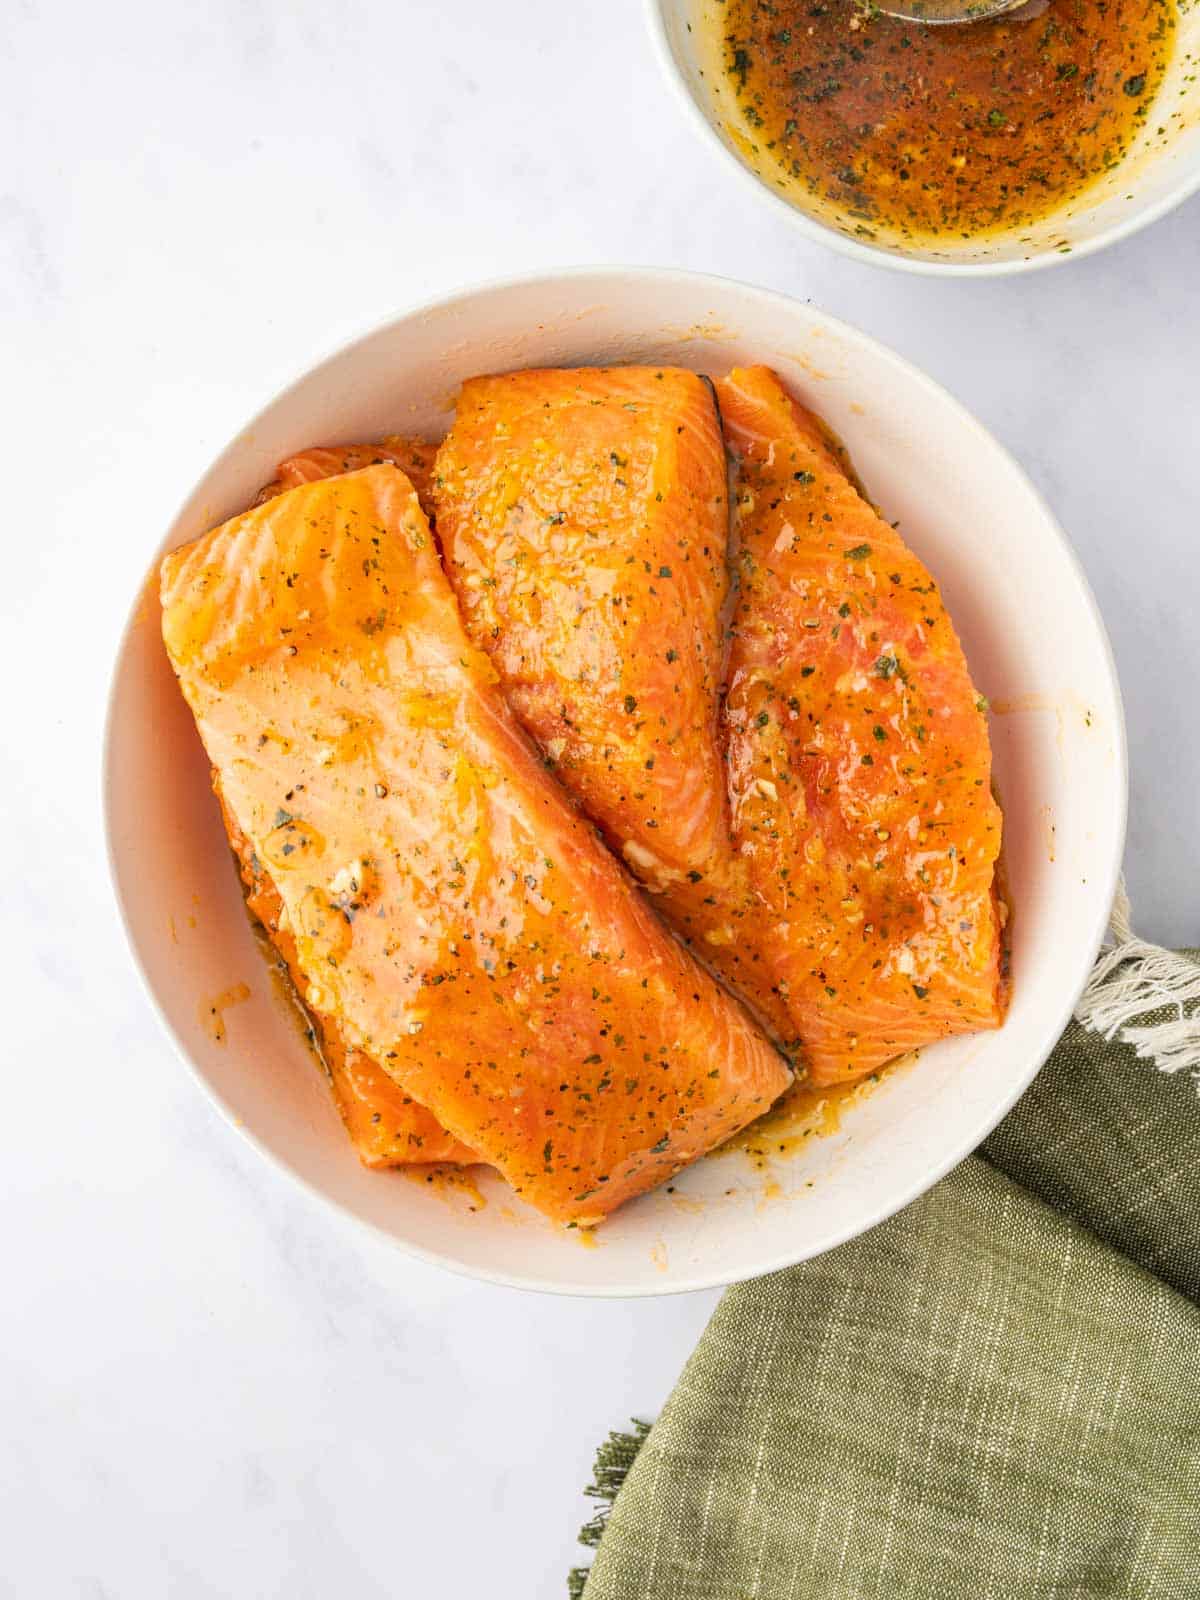 Marinated salmon filets in a bowl.